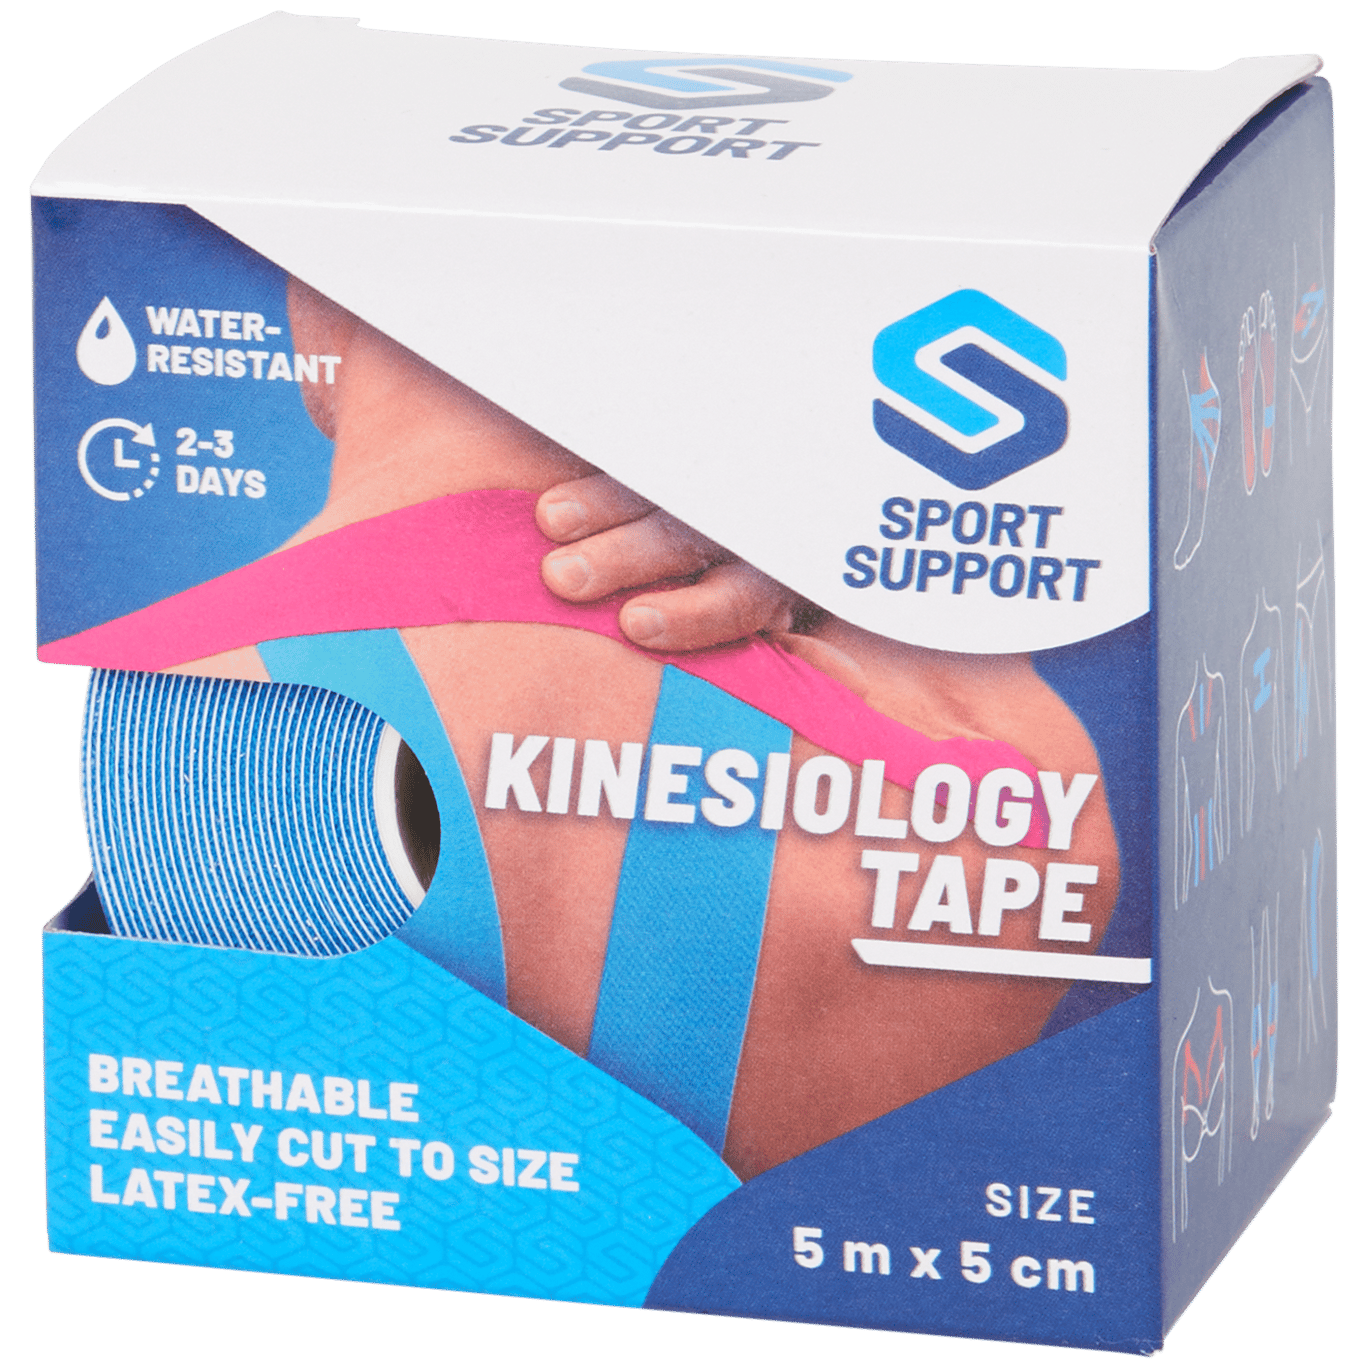 Sport Support tape | Action.com